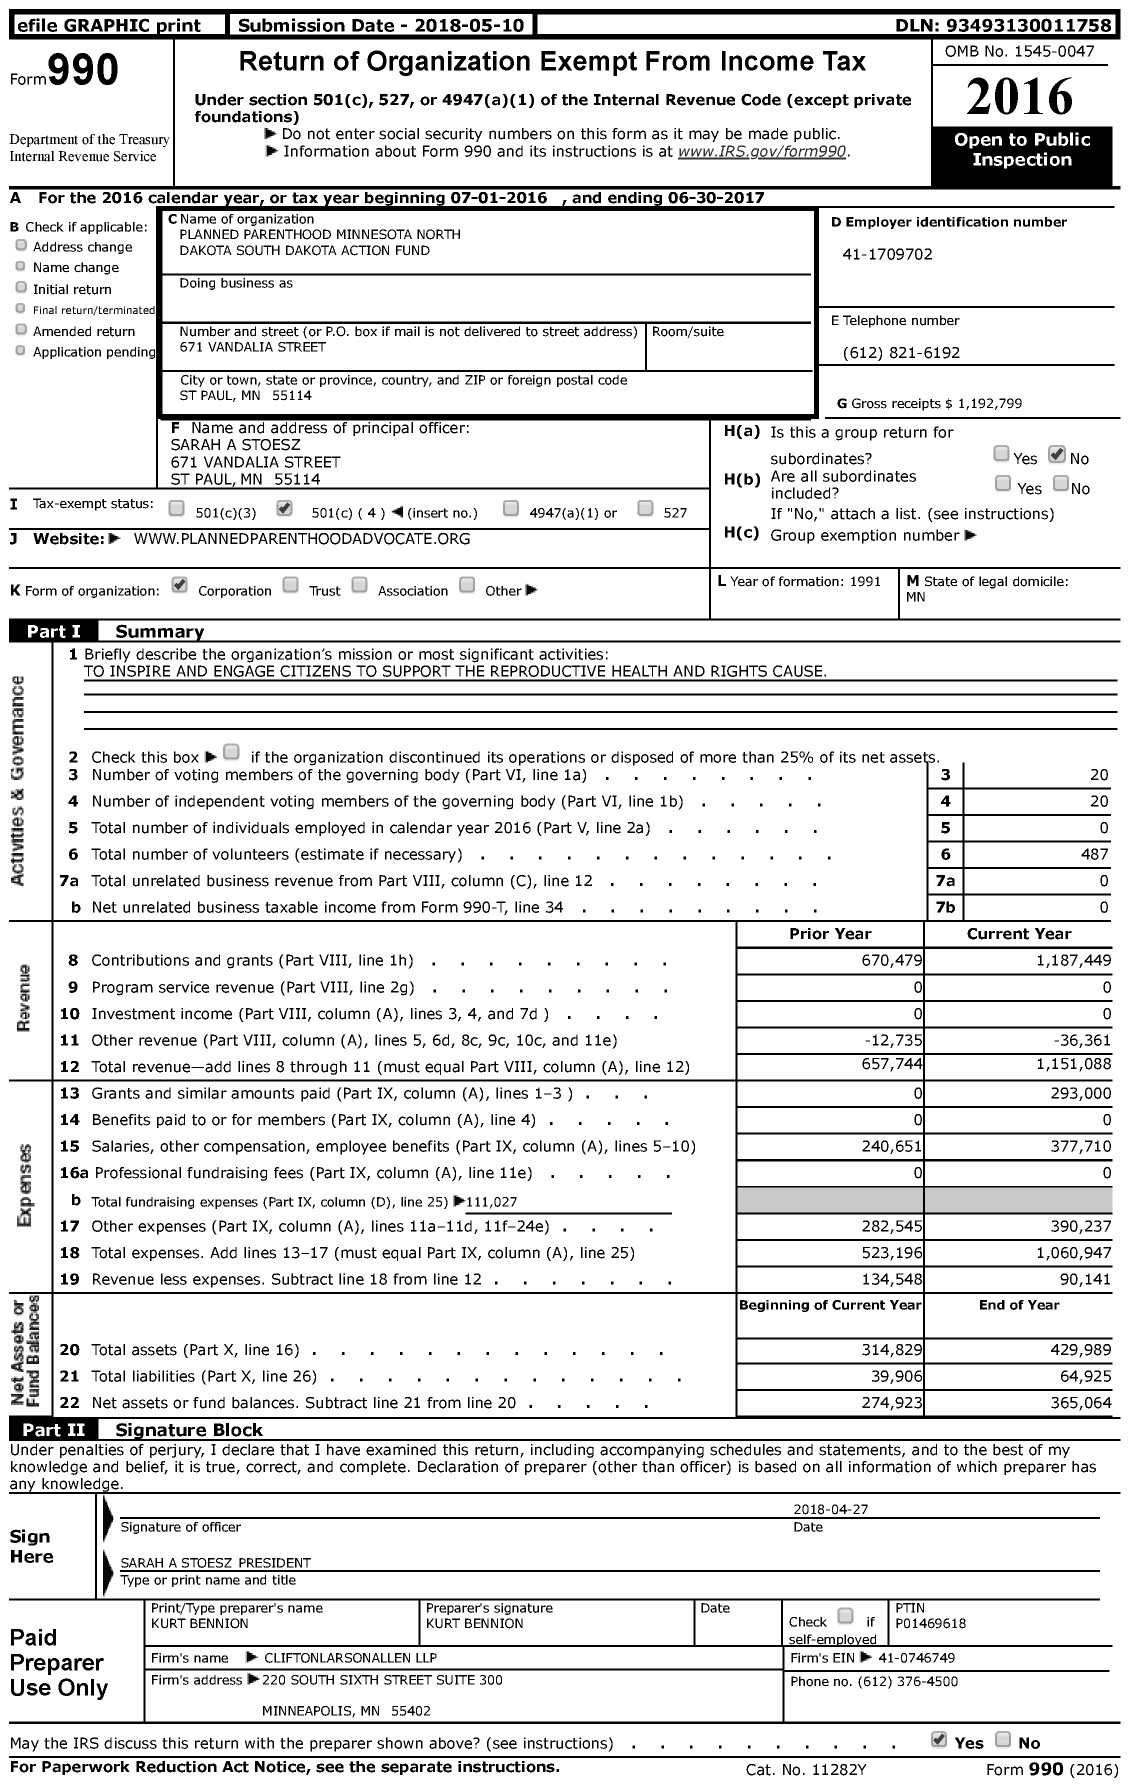 Image of first page of 2016 Form 990 for Planned Parenthood Minnesota North Dakota South Dakota Action Fund